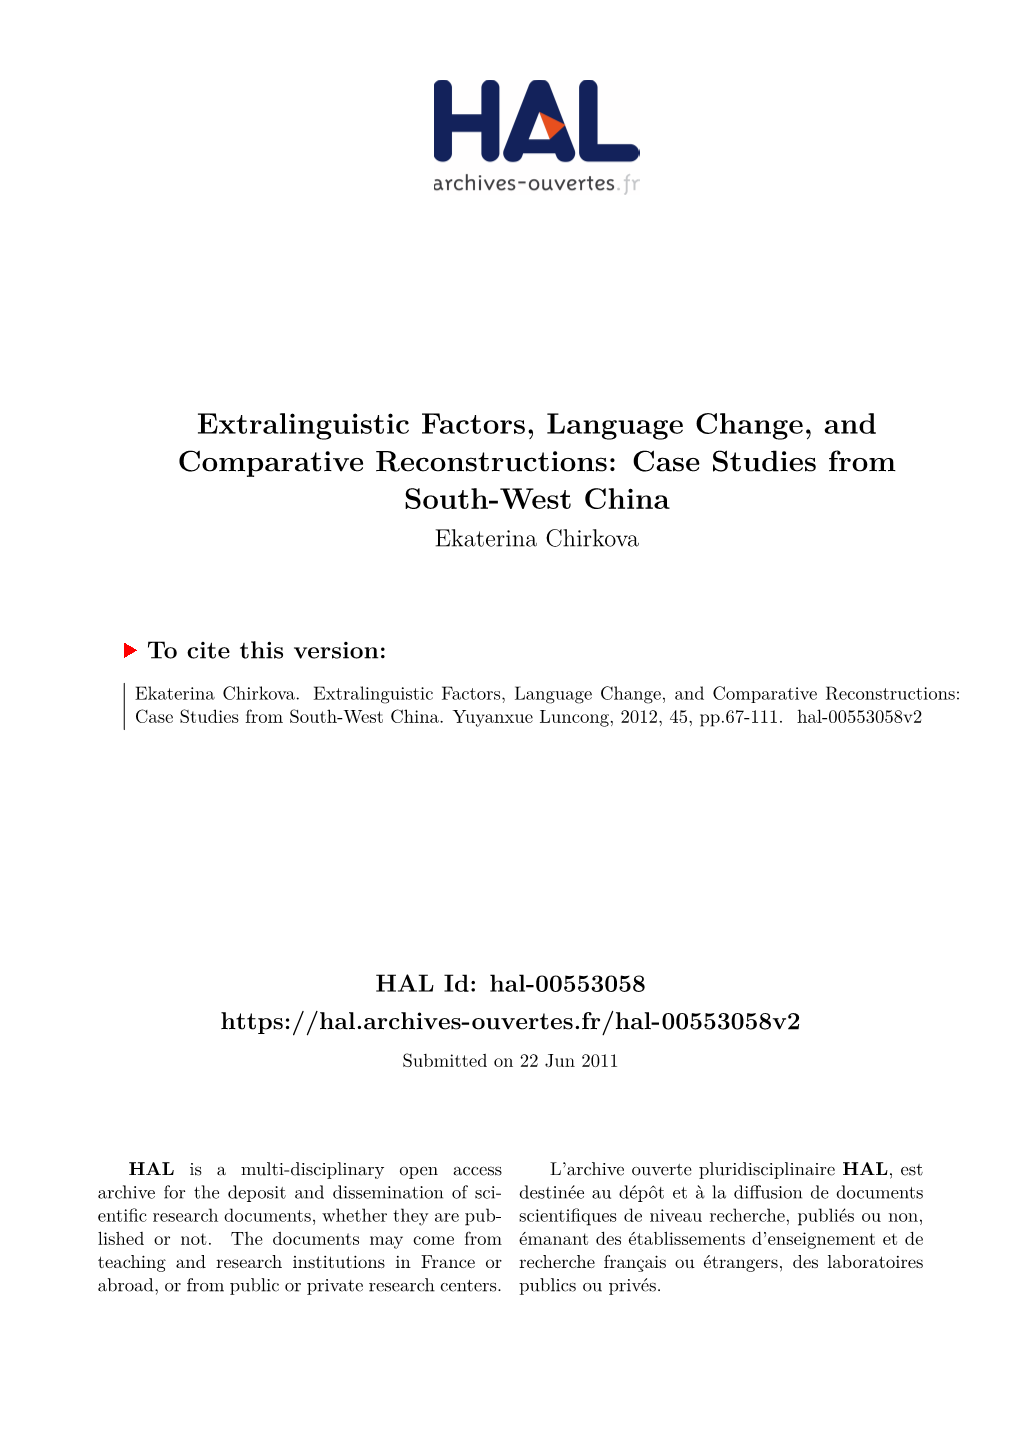 Extralinguistic Factors, Language Change, and Comparative Reconstructions: Case Studies from South-West China Ekaterina Chirkova